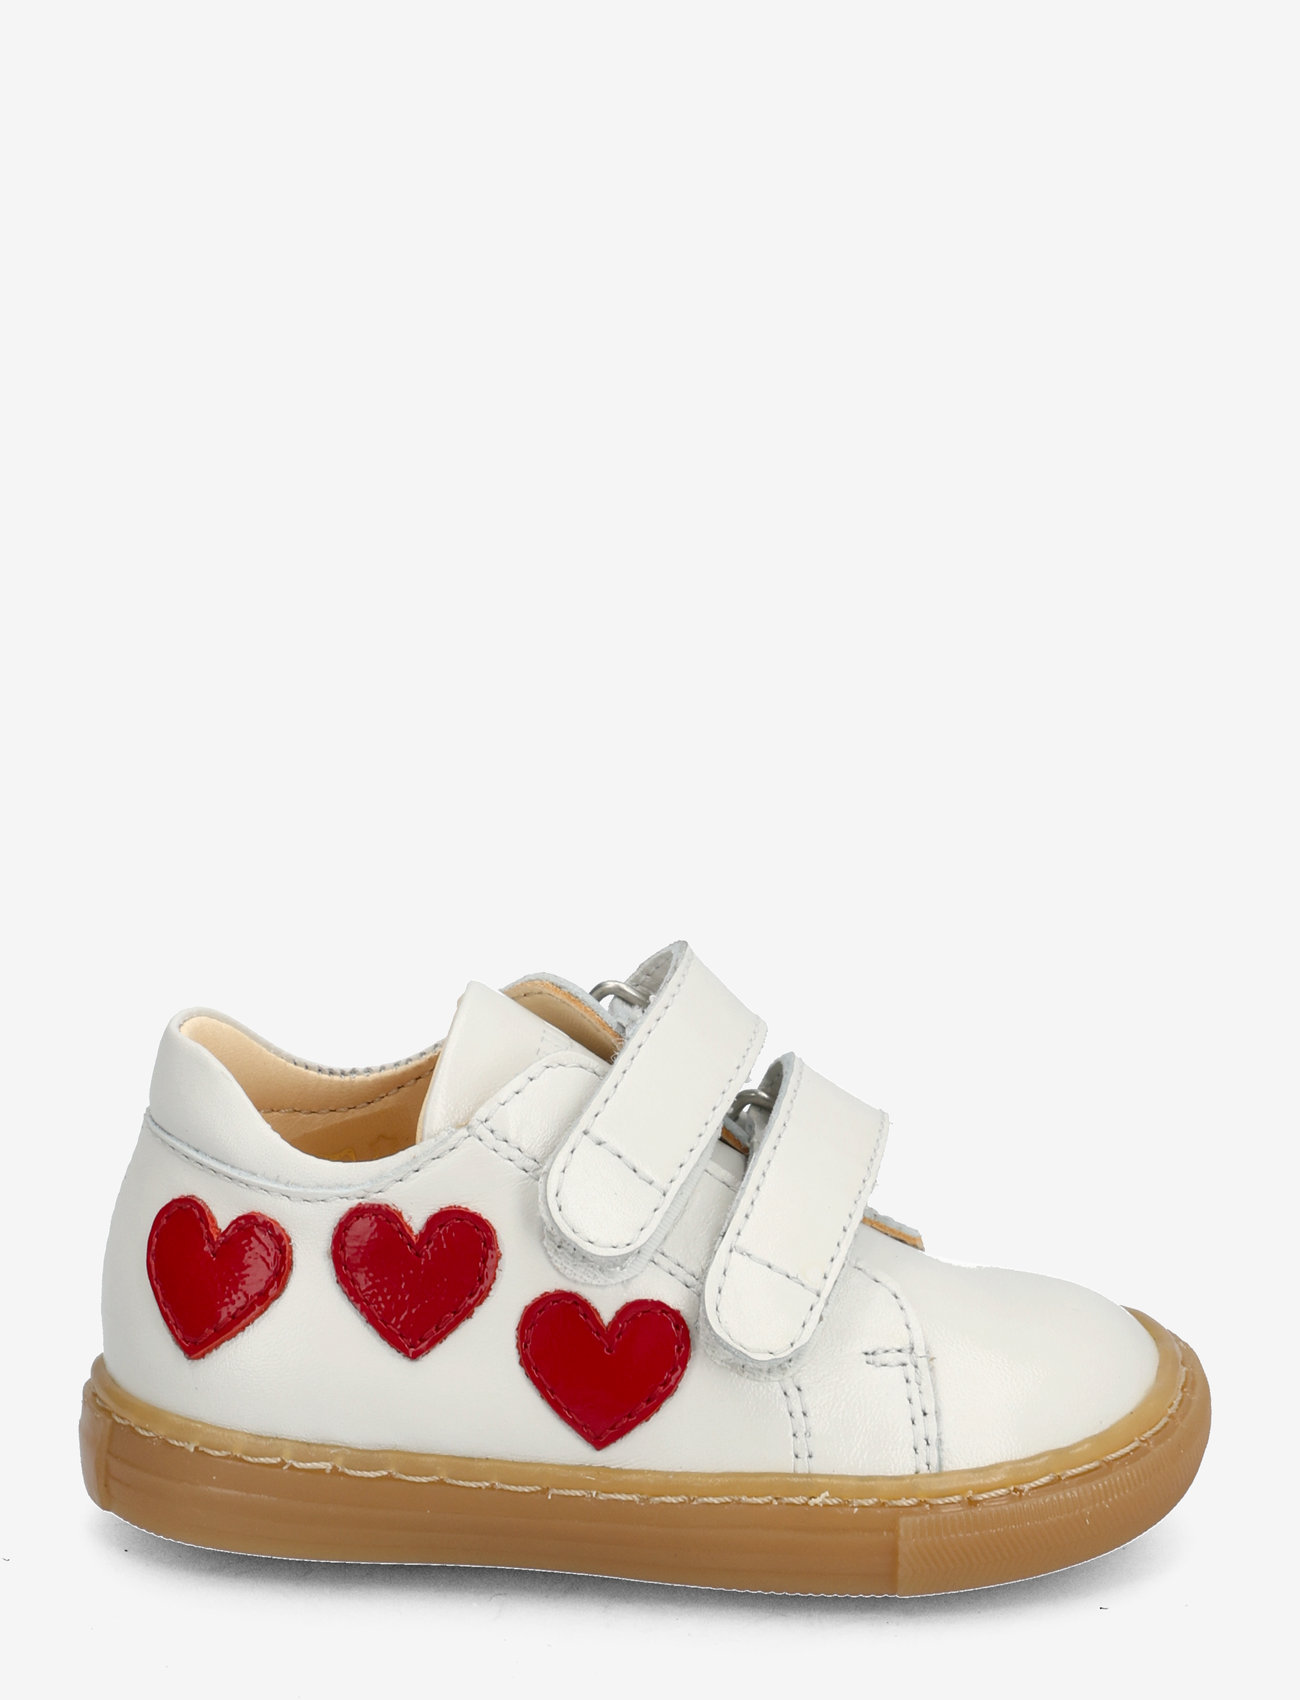 ANGULUS - Shoes - flat - with velcro - gode sommertilbud - 1493/a003 off white/hearts - 1